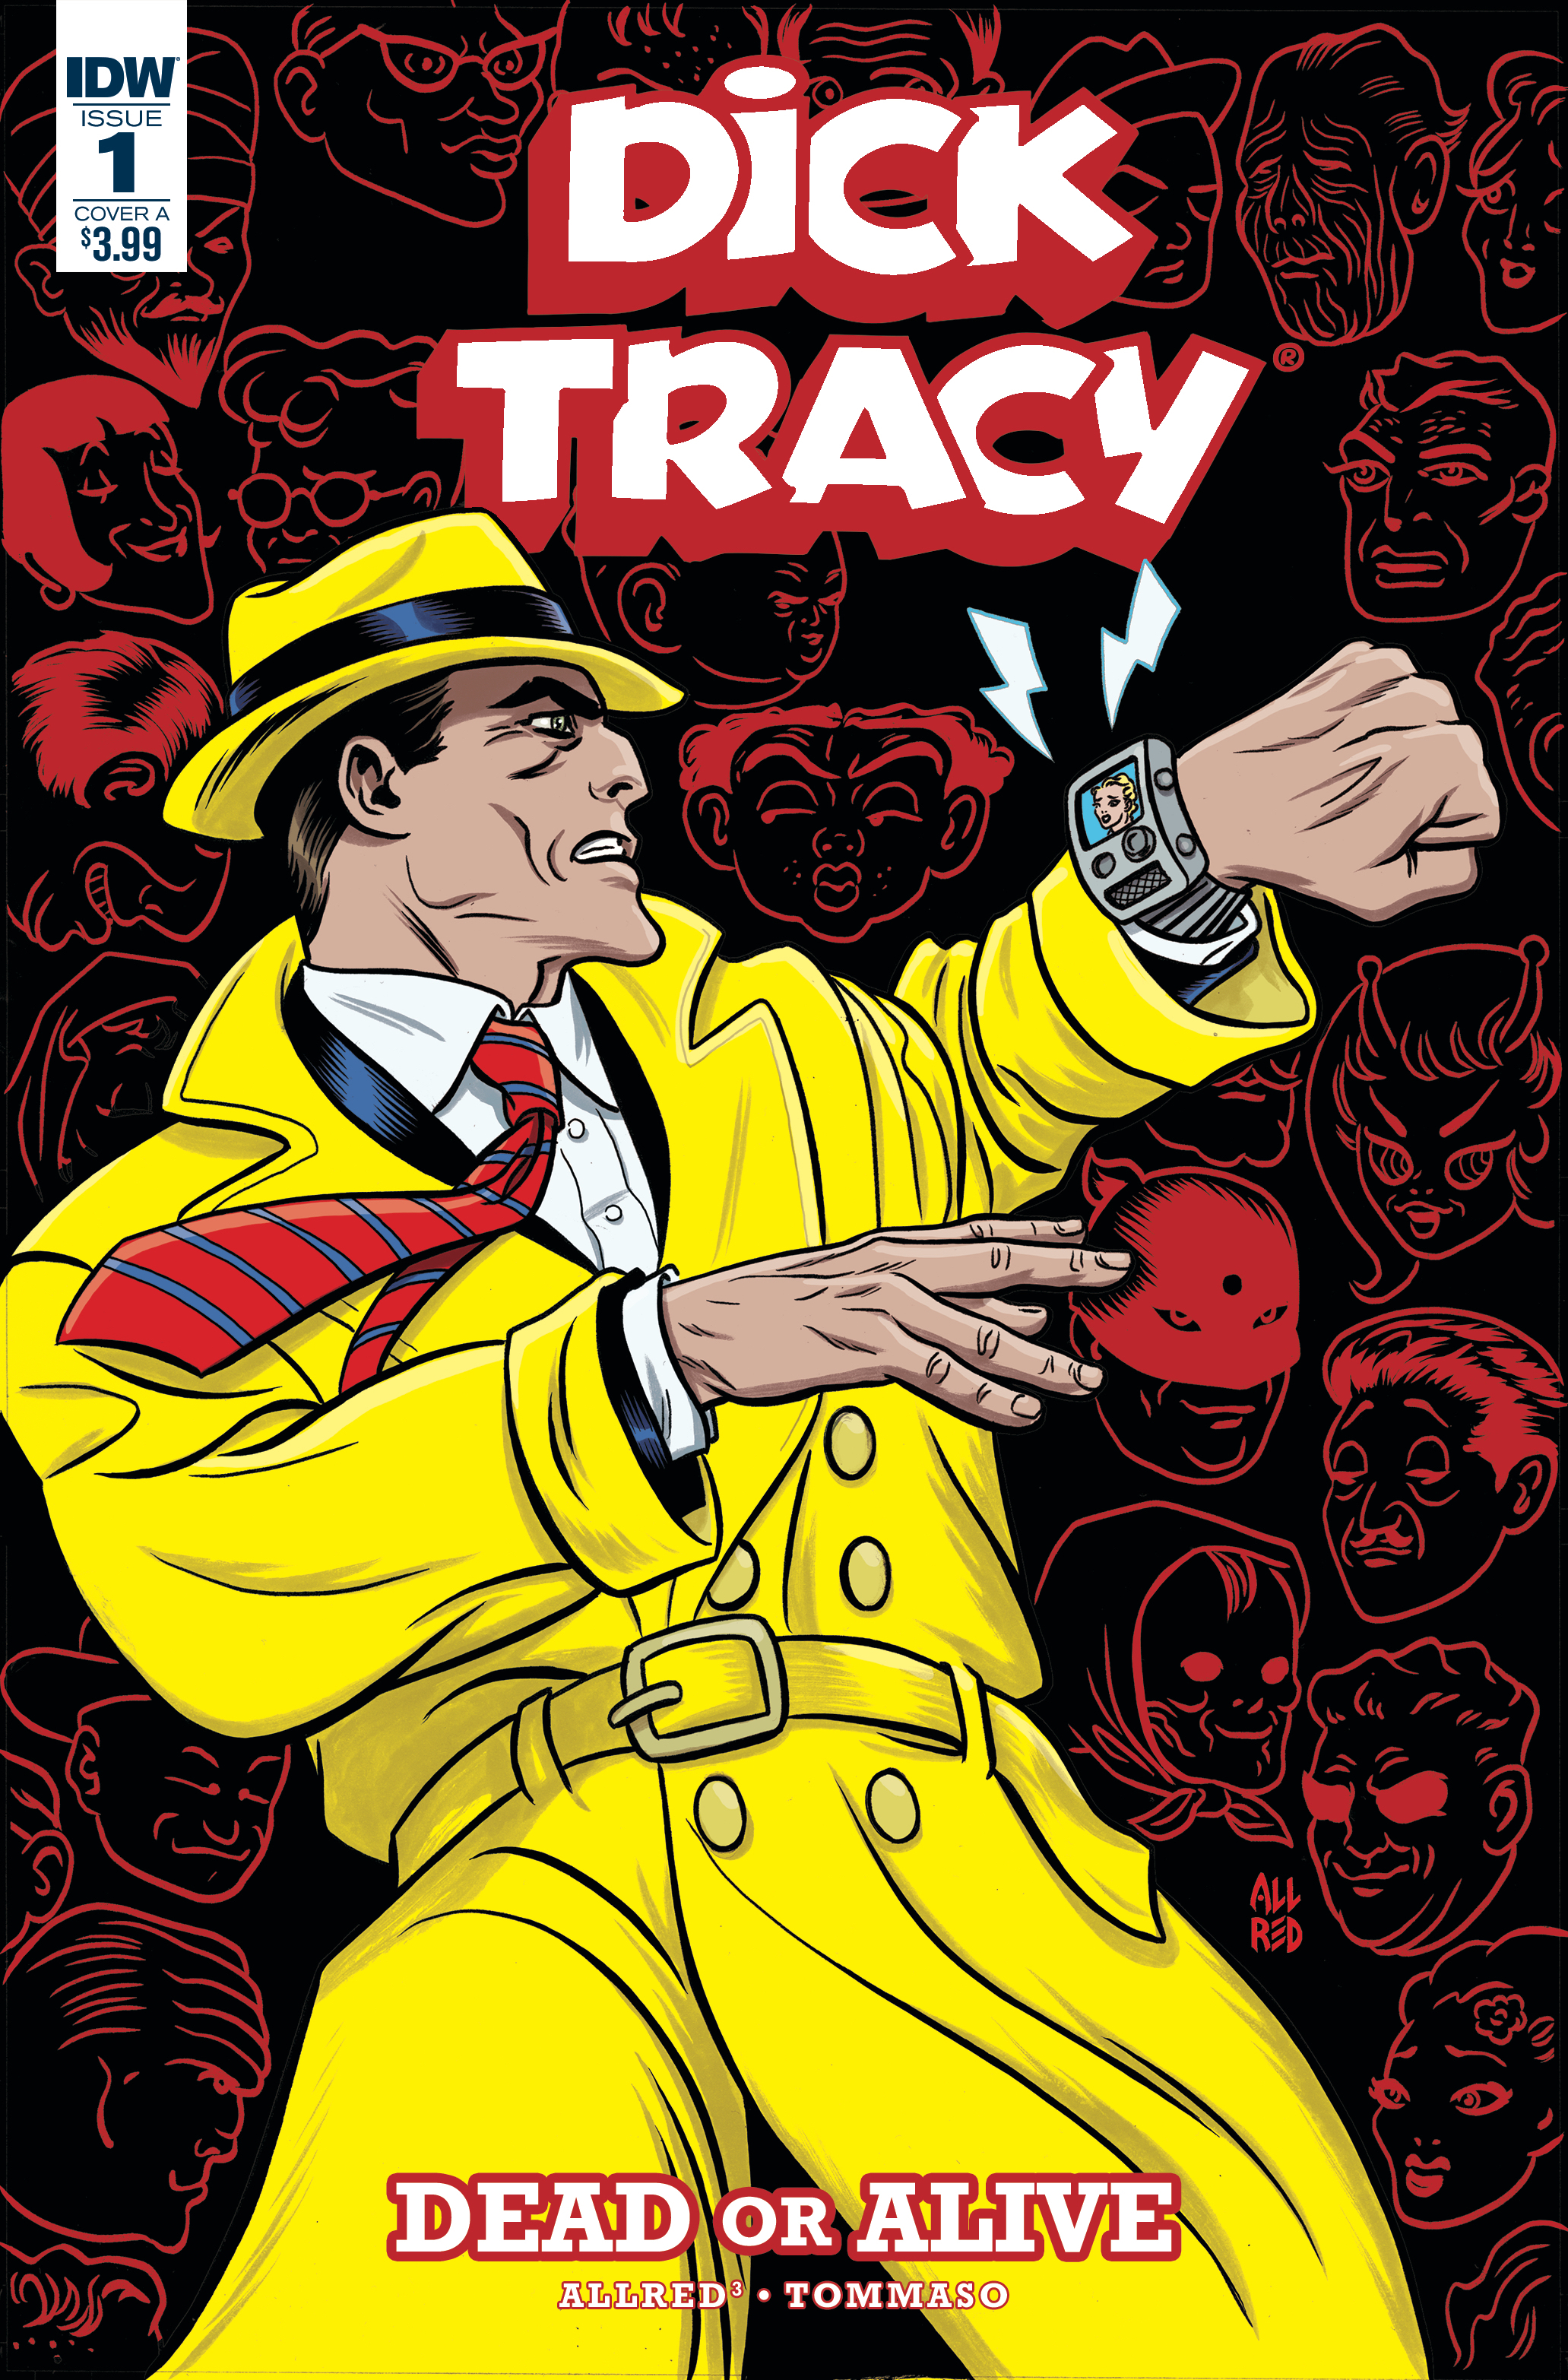 DICK TRACY DEAD OR ALIVE #1 (OF 4) CVR A ALLRED